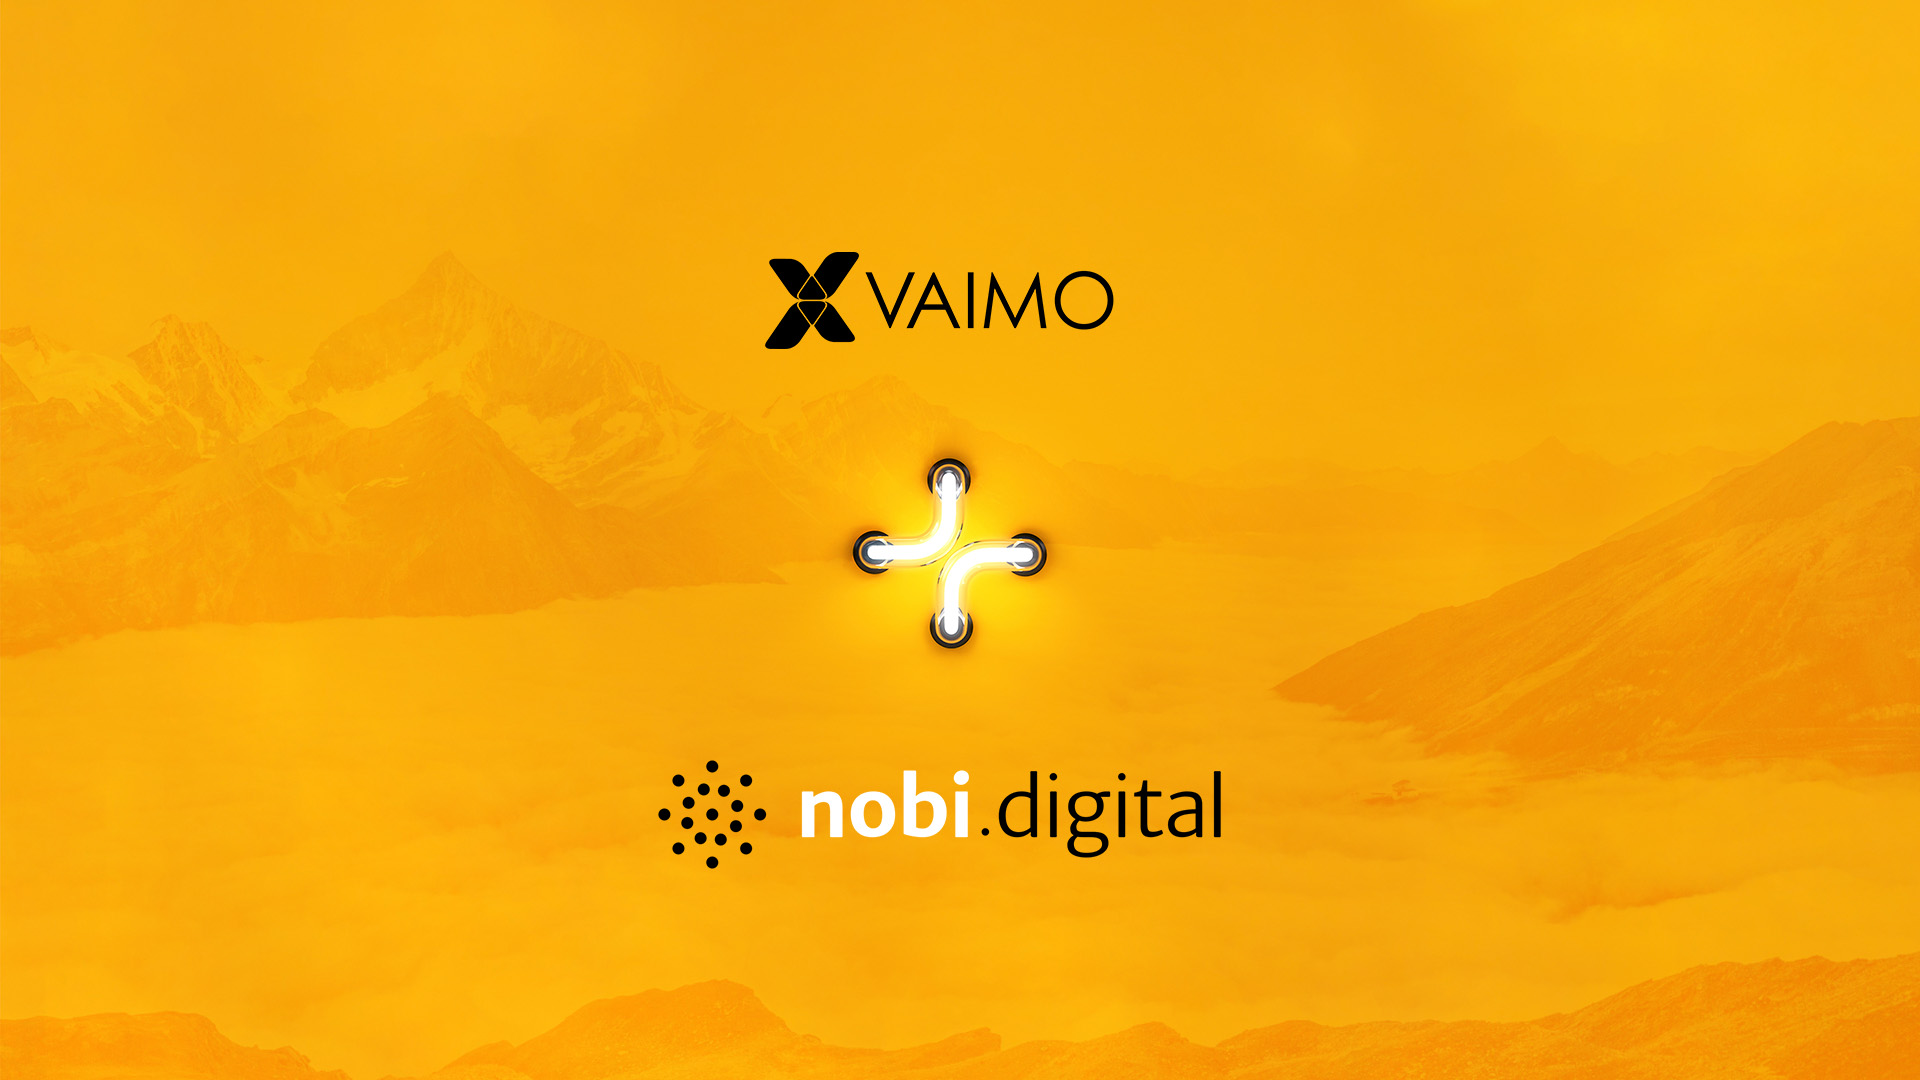 Vaimo abstract press release image (nobi.digital acquisition)